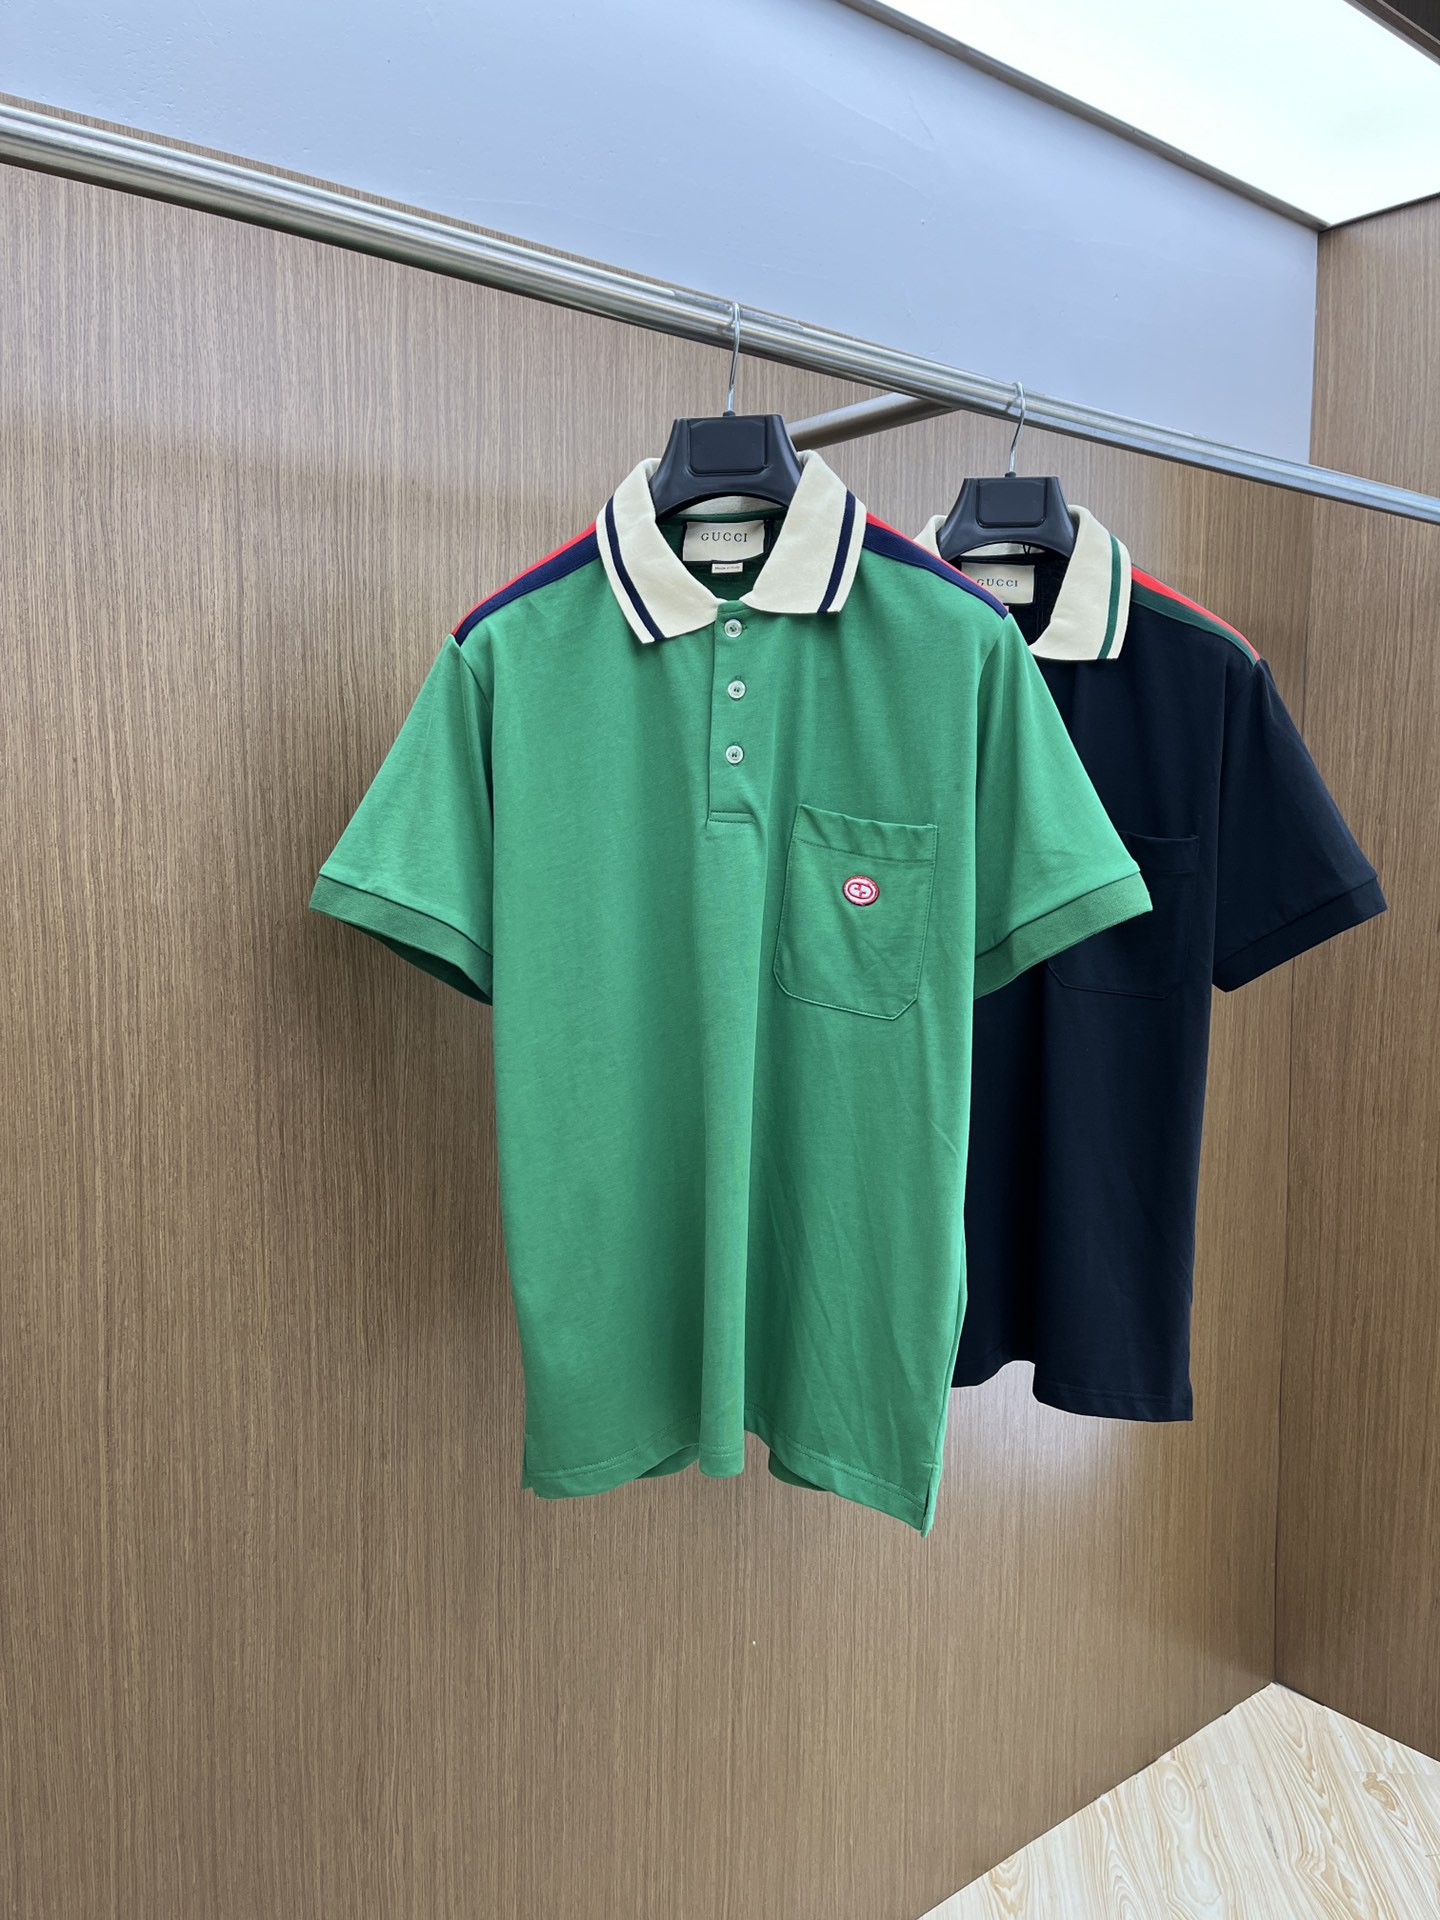 Gucci Clothing Coats & Jackets Pants & Trousers Polo T-Shirt cheap online Best Designer
 Black Green Red Embroidery Cotton Knitted Knitting Spring/Summer Collection Vintage Short Sleeve